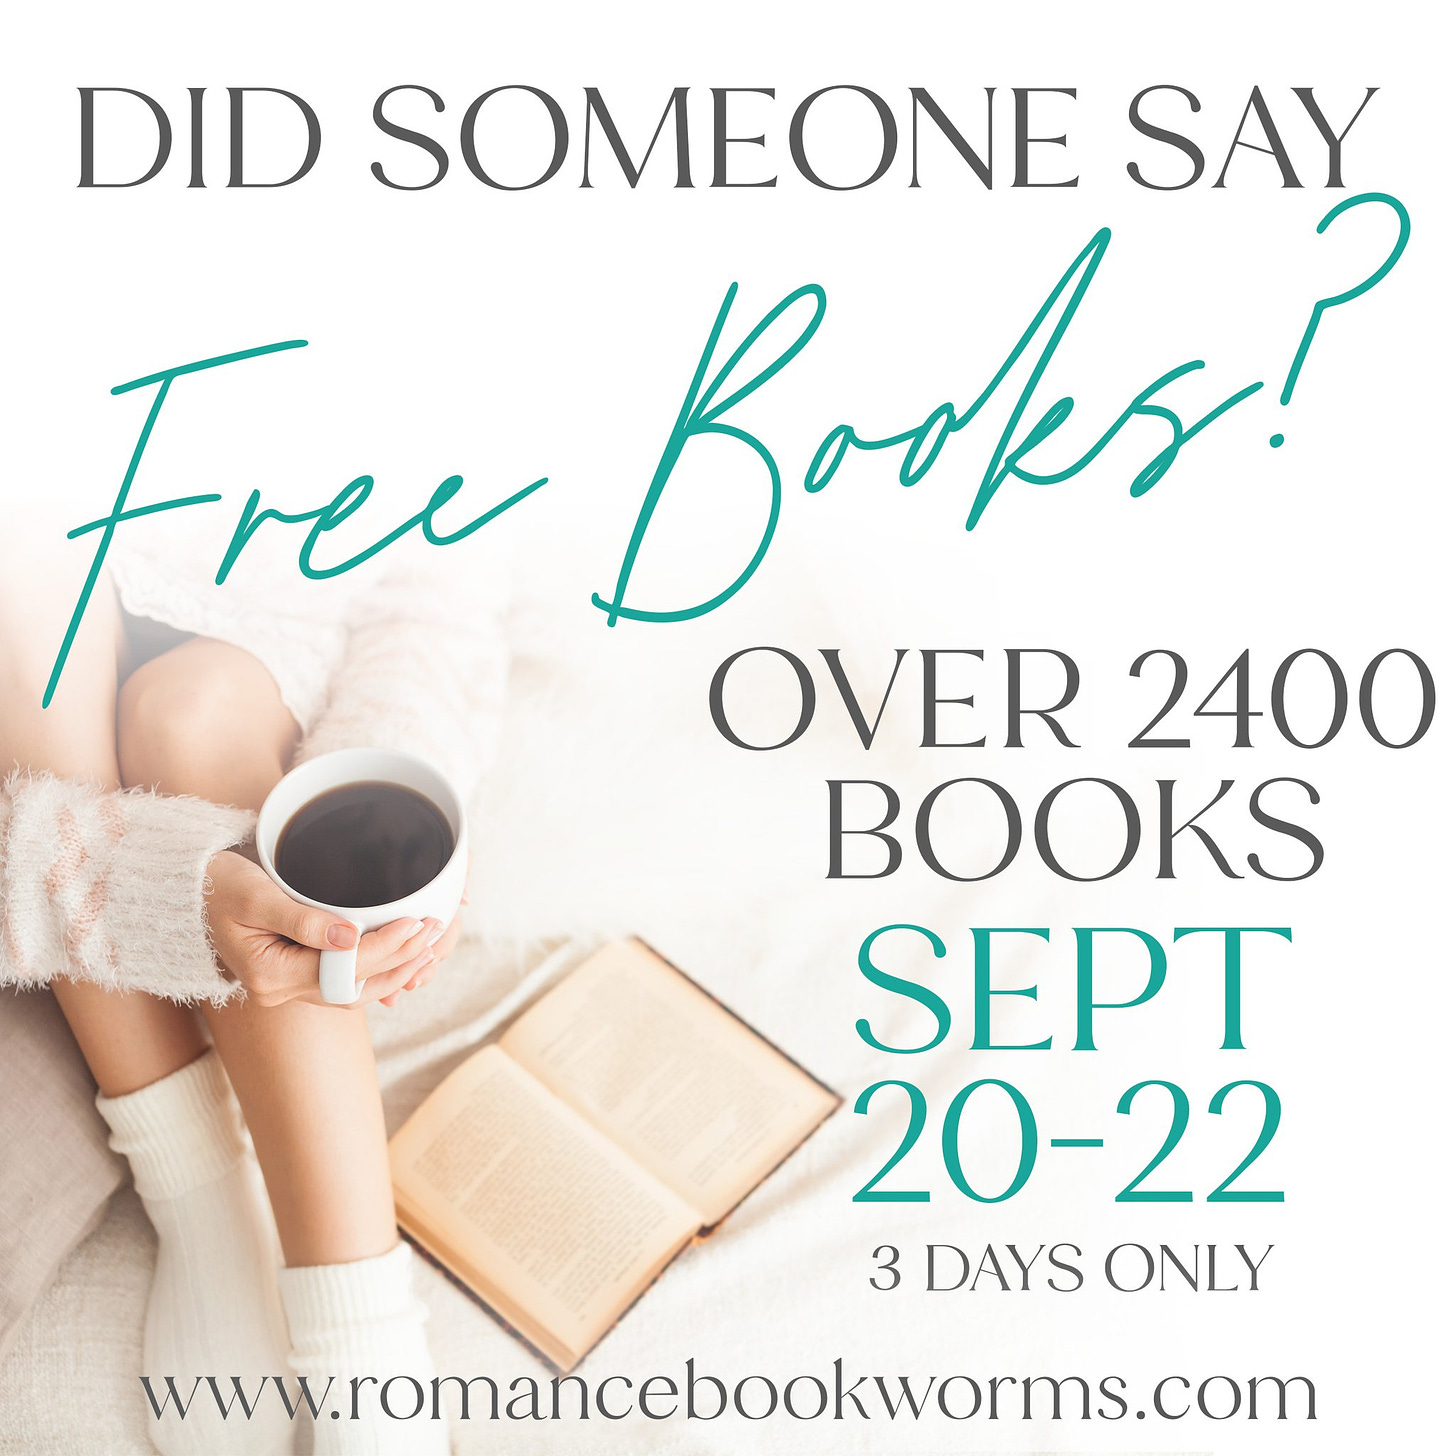 Did someone say Free Books? Over 2400 books free for three days only, Sept 20-22 at romance bookworms.com